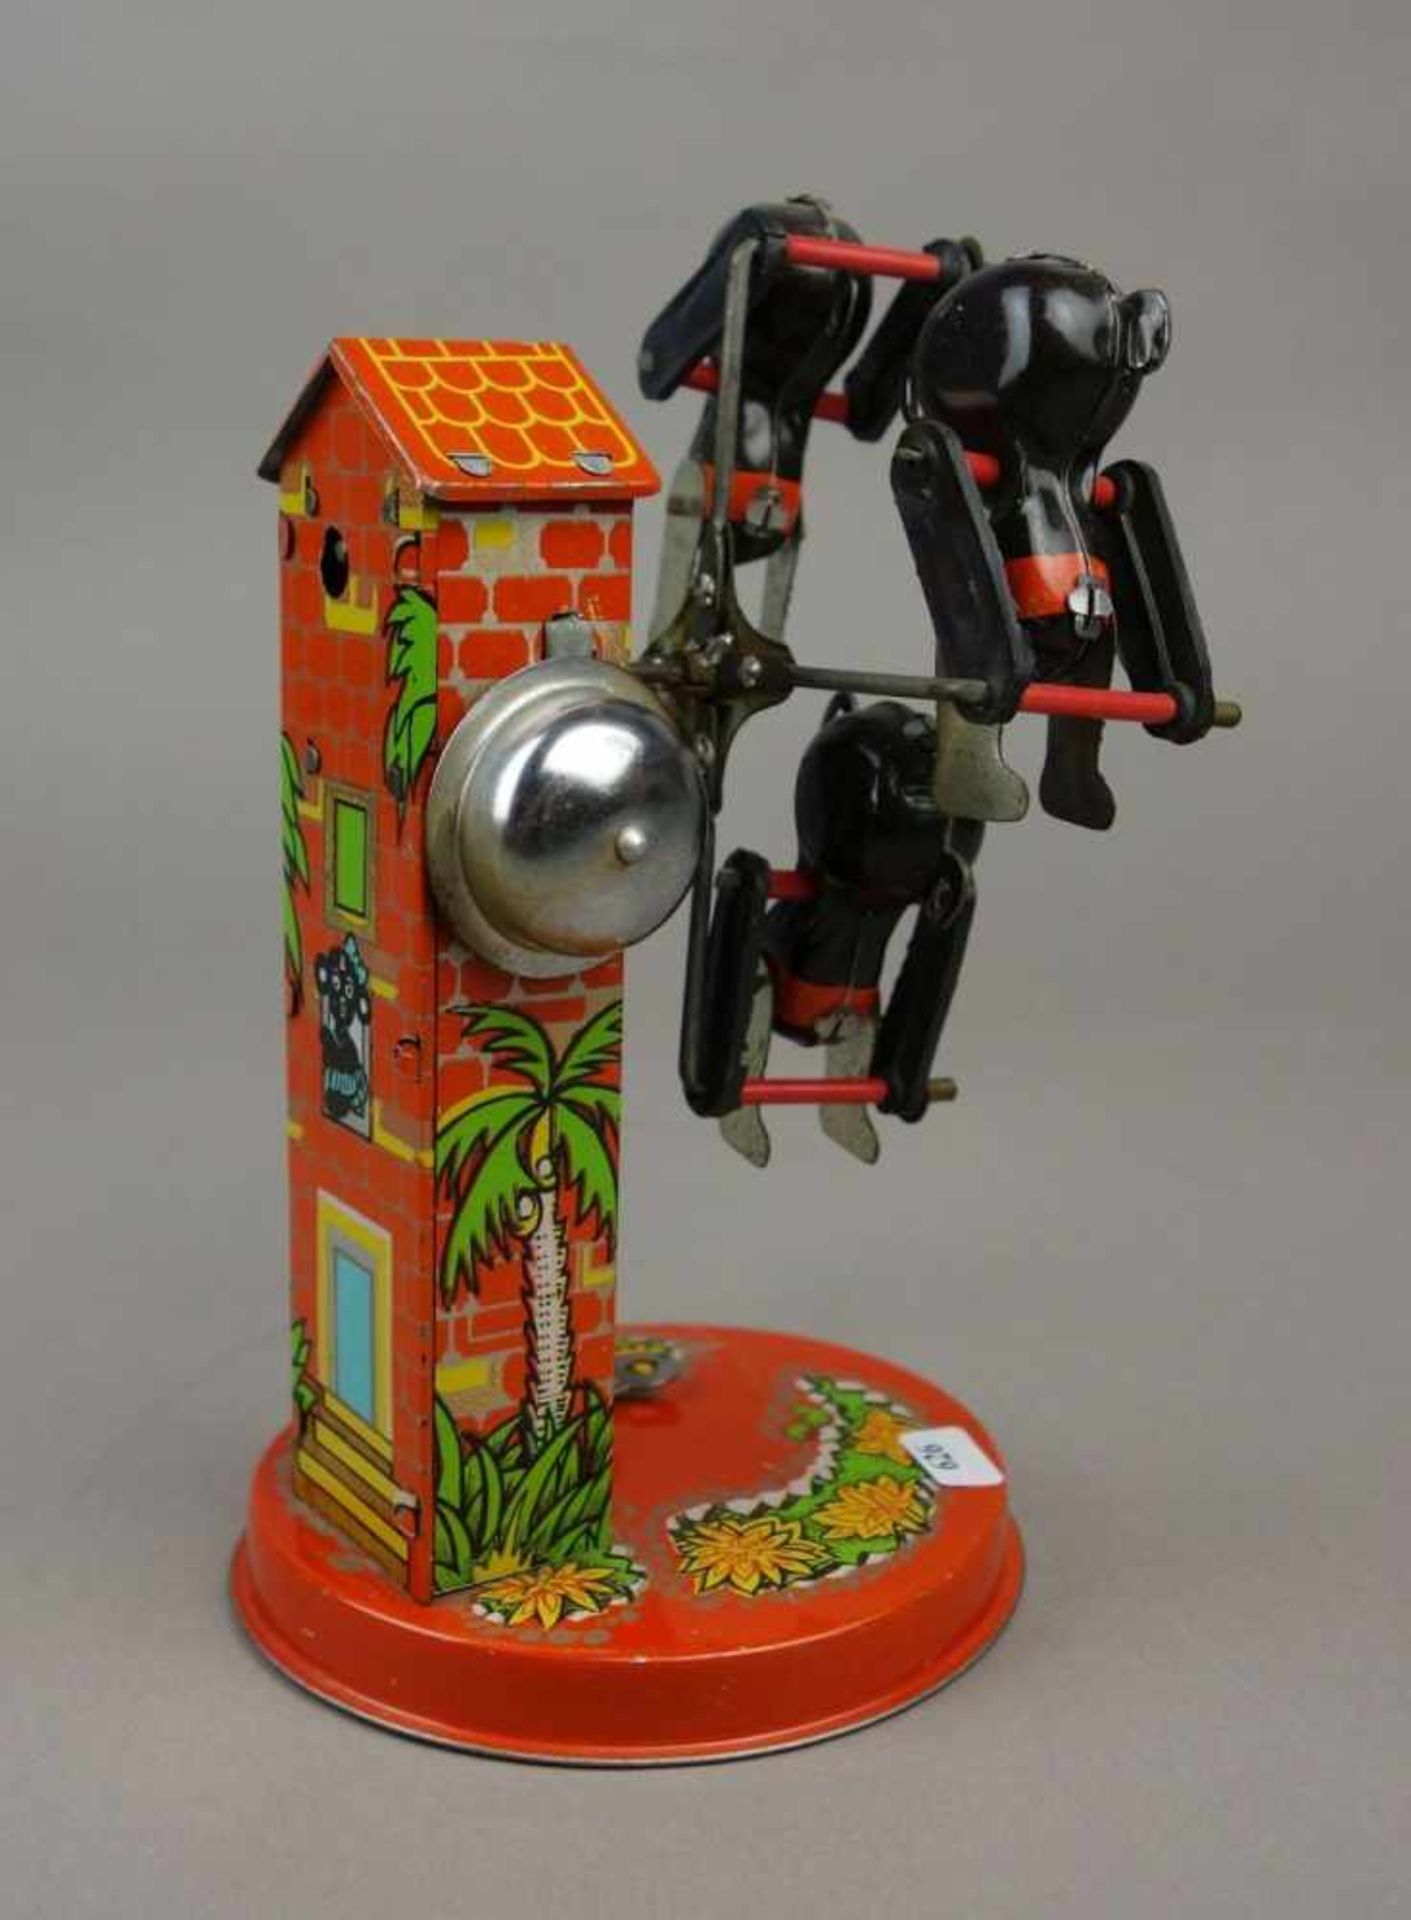 BLECHSPIELZEUG: Karussell / "Affenschaukel" / tin toy carousel with apes, Blech, polychrom - Image 6 of 7